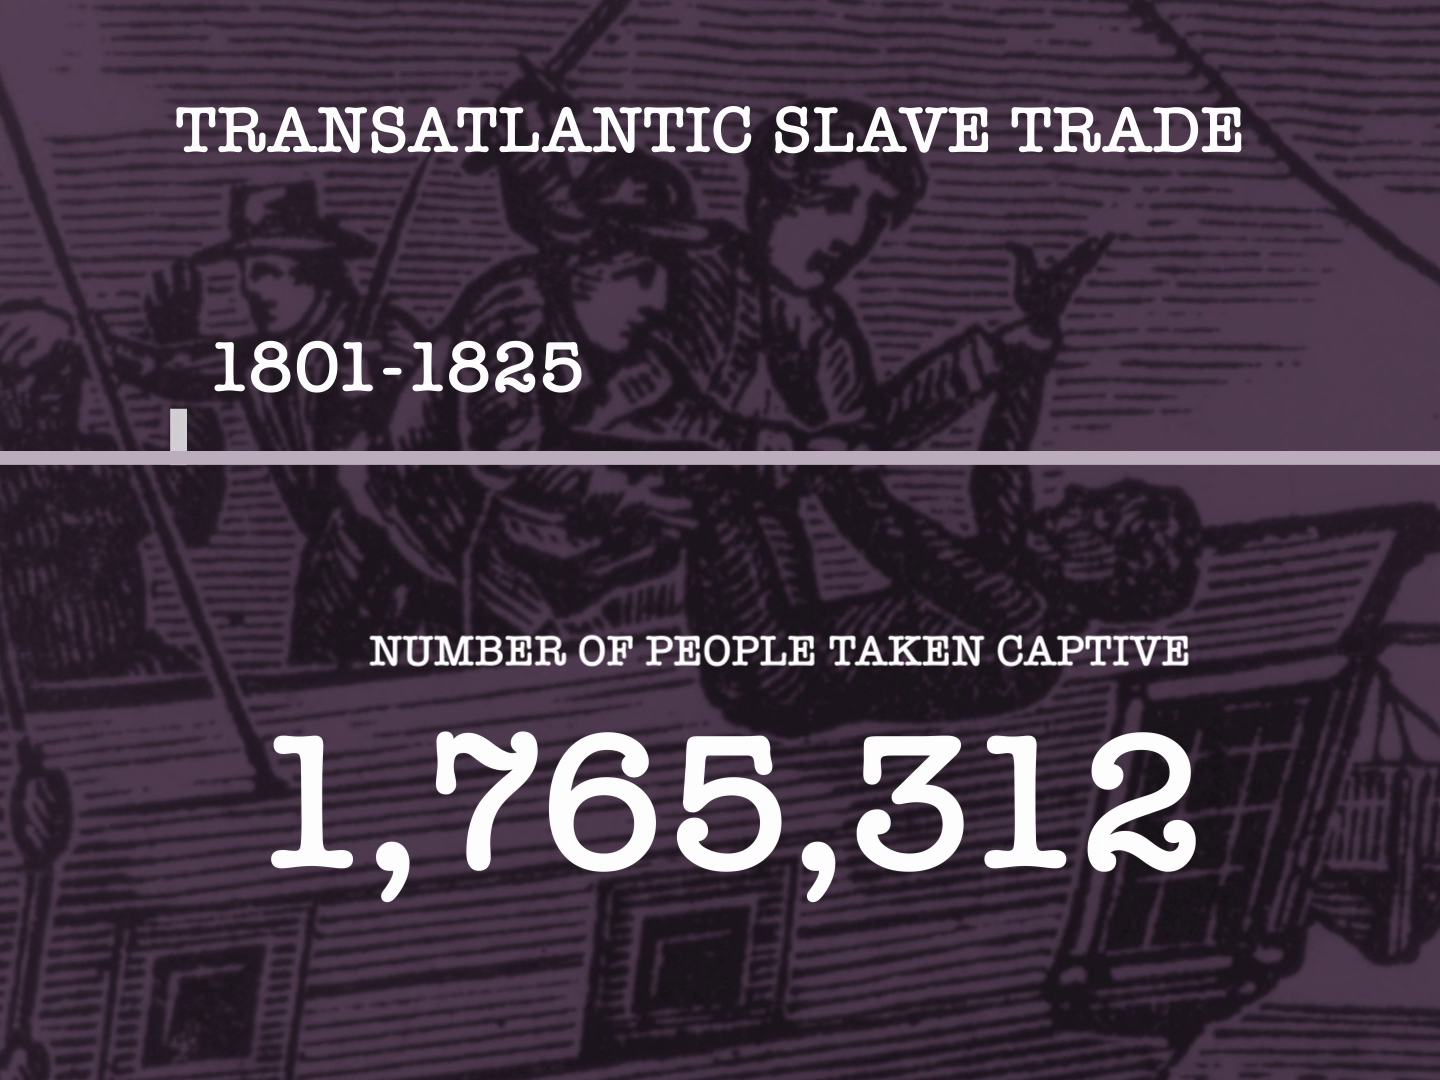 A timeline with amount of slaves taken captive, statistics provided by the Newark Museum